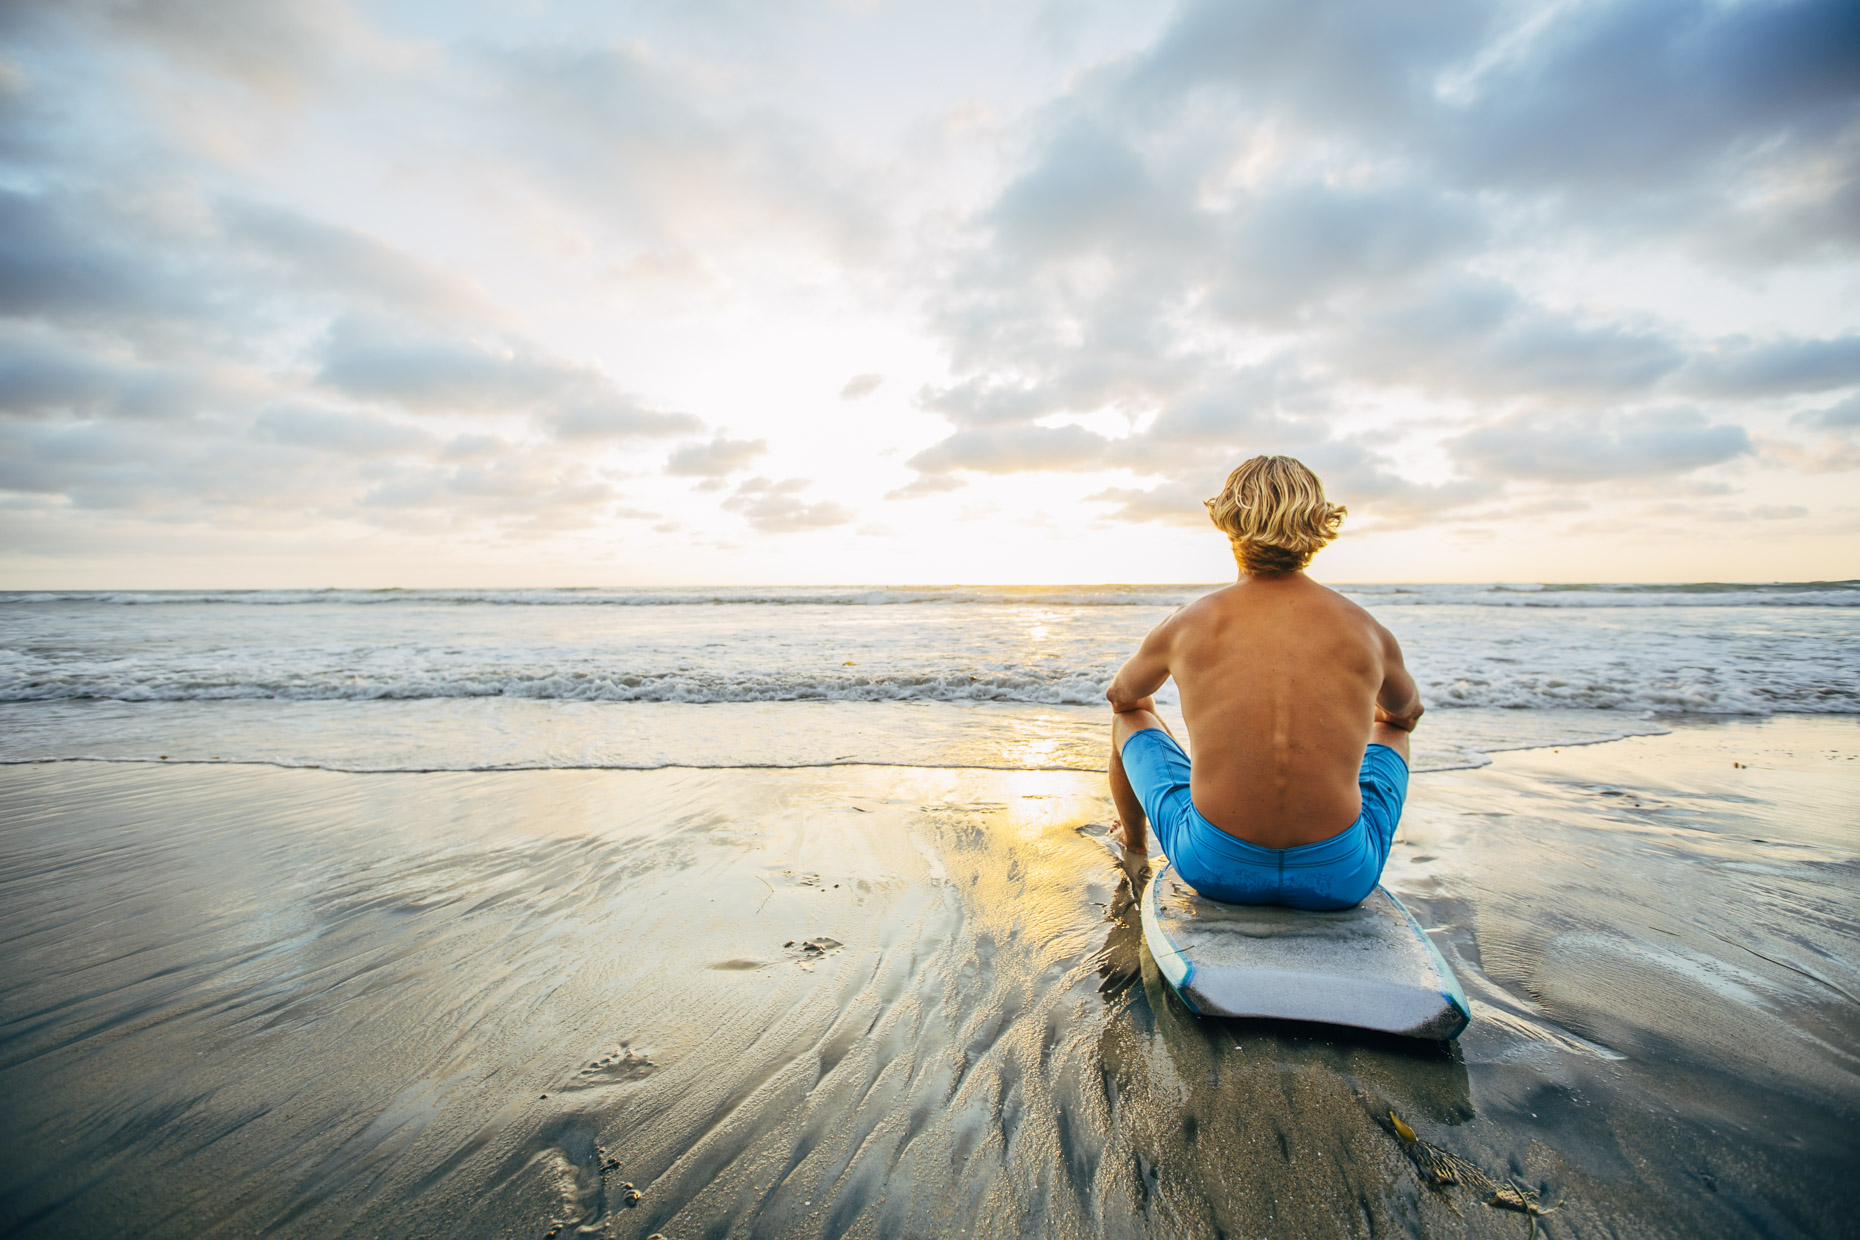 Man sitting on surfboard on beach looking out at ocean sunset